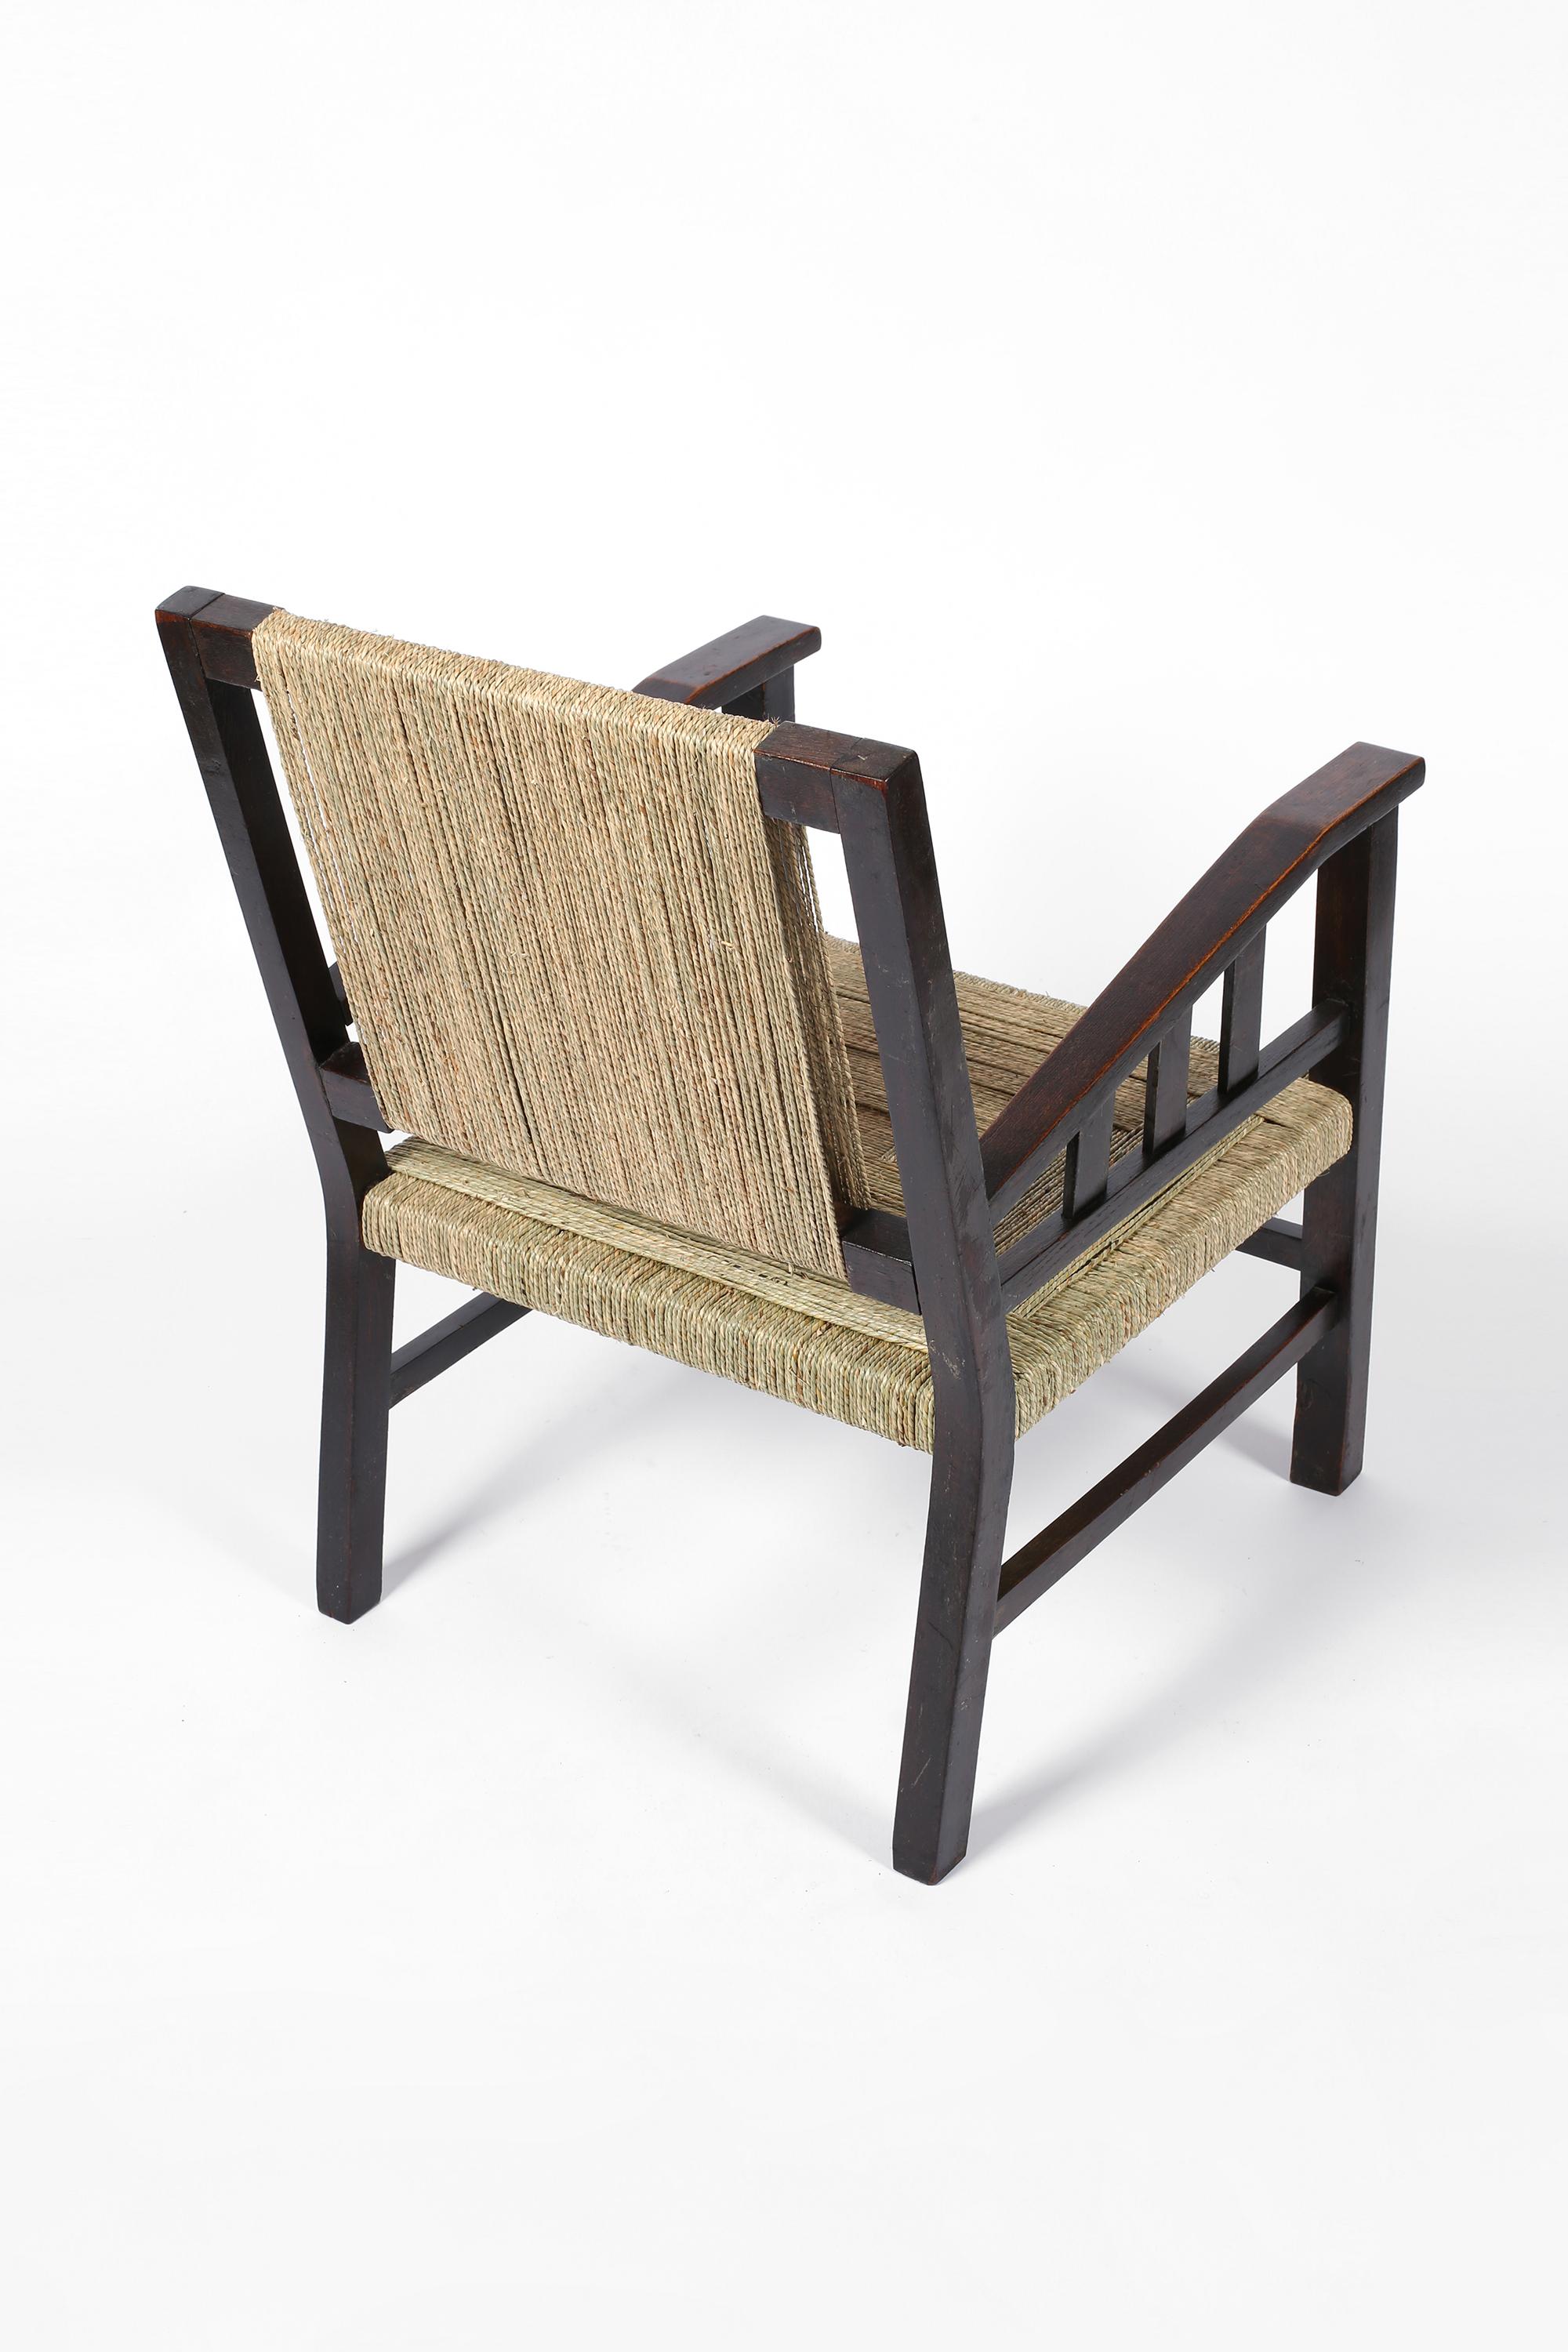 Seagrass 1930s French Modernist Art Deco Armchair by Francis Jourdain in Beech and Rope For Sale